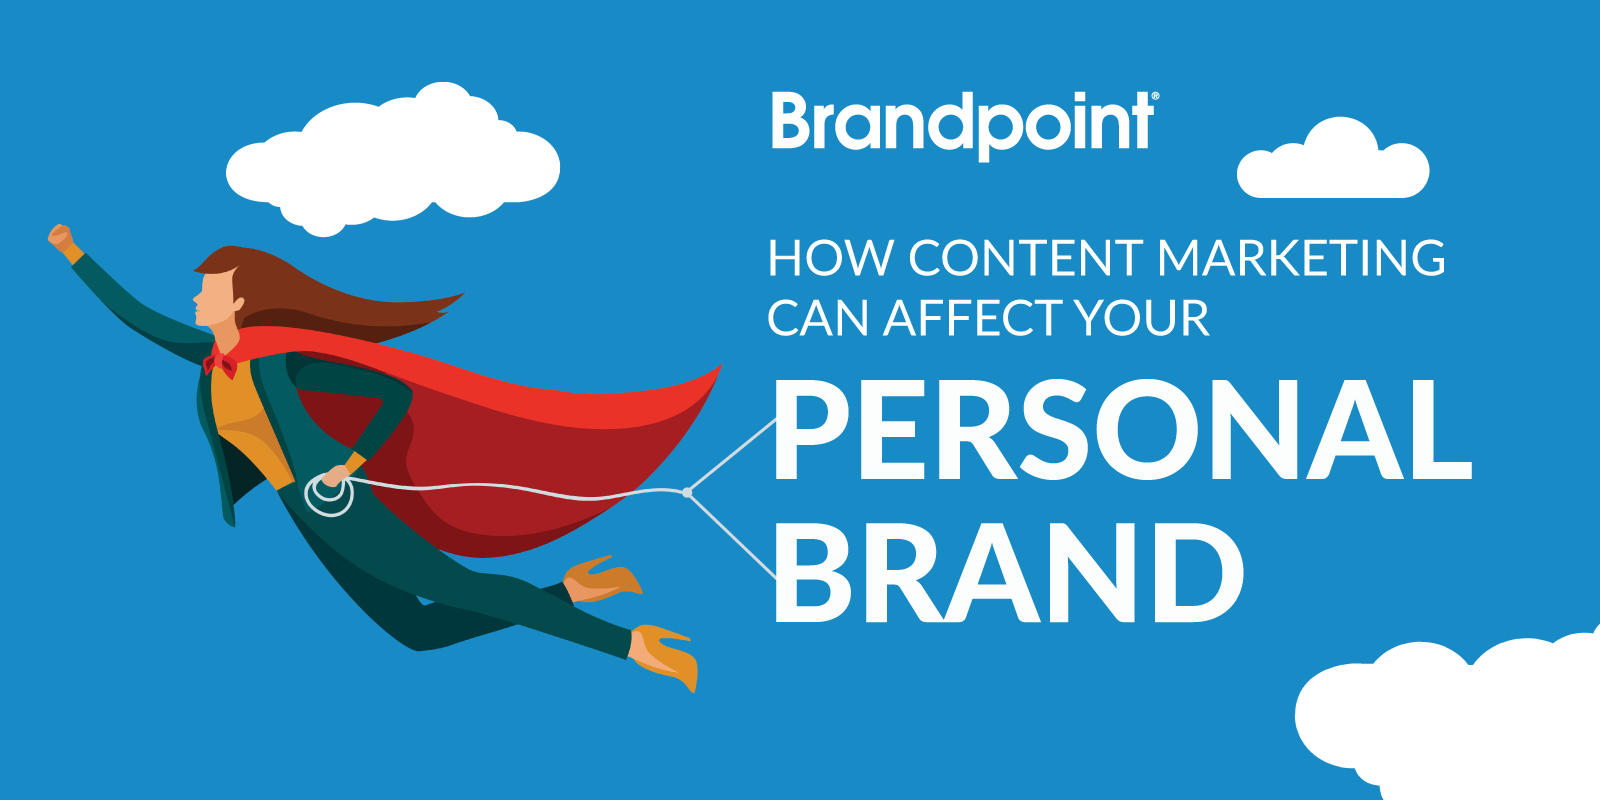 Content Marketing Affects Your Personal Brand